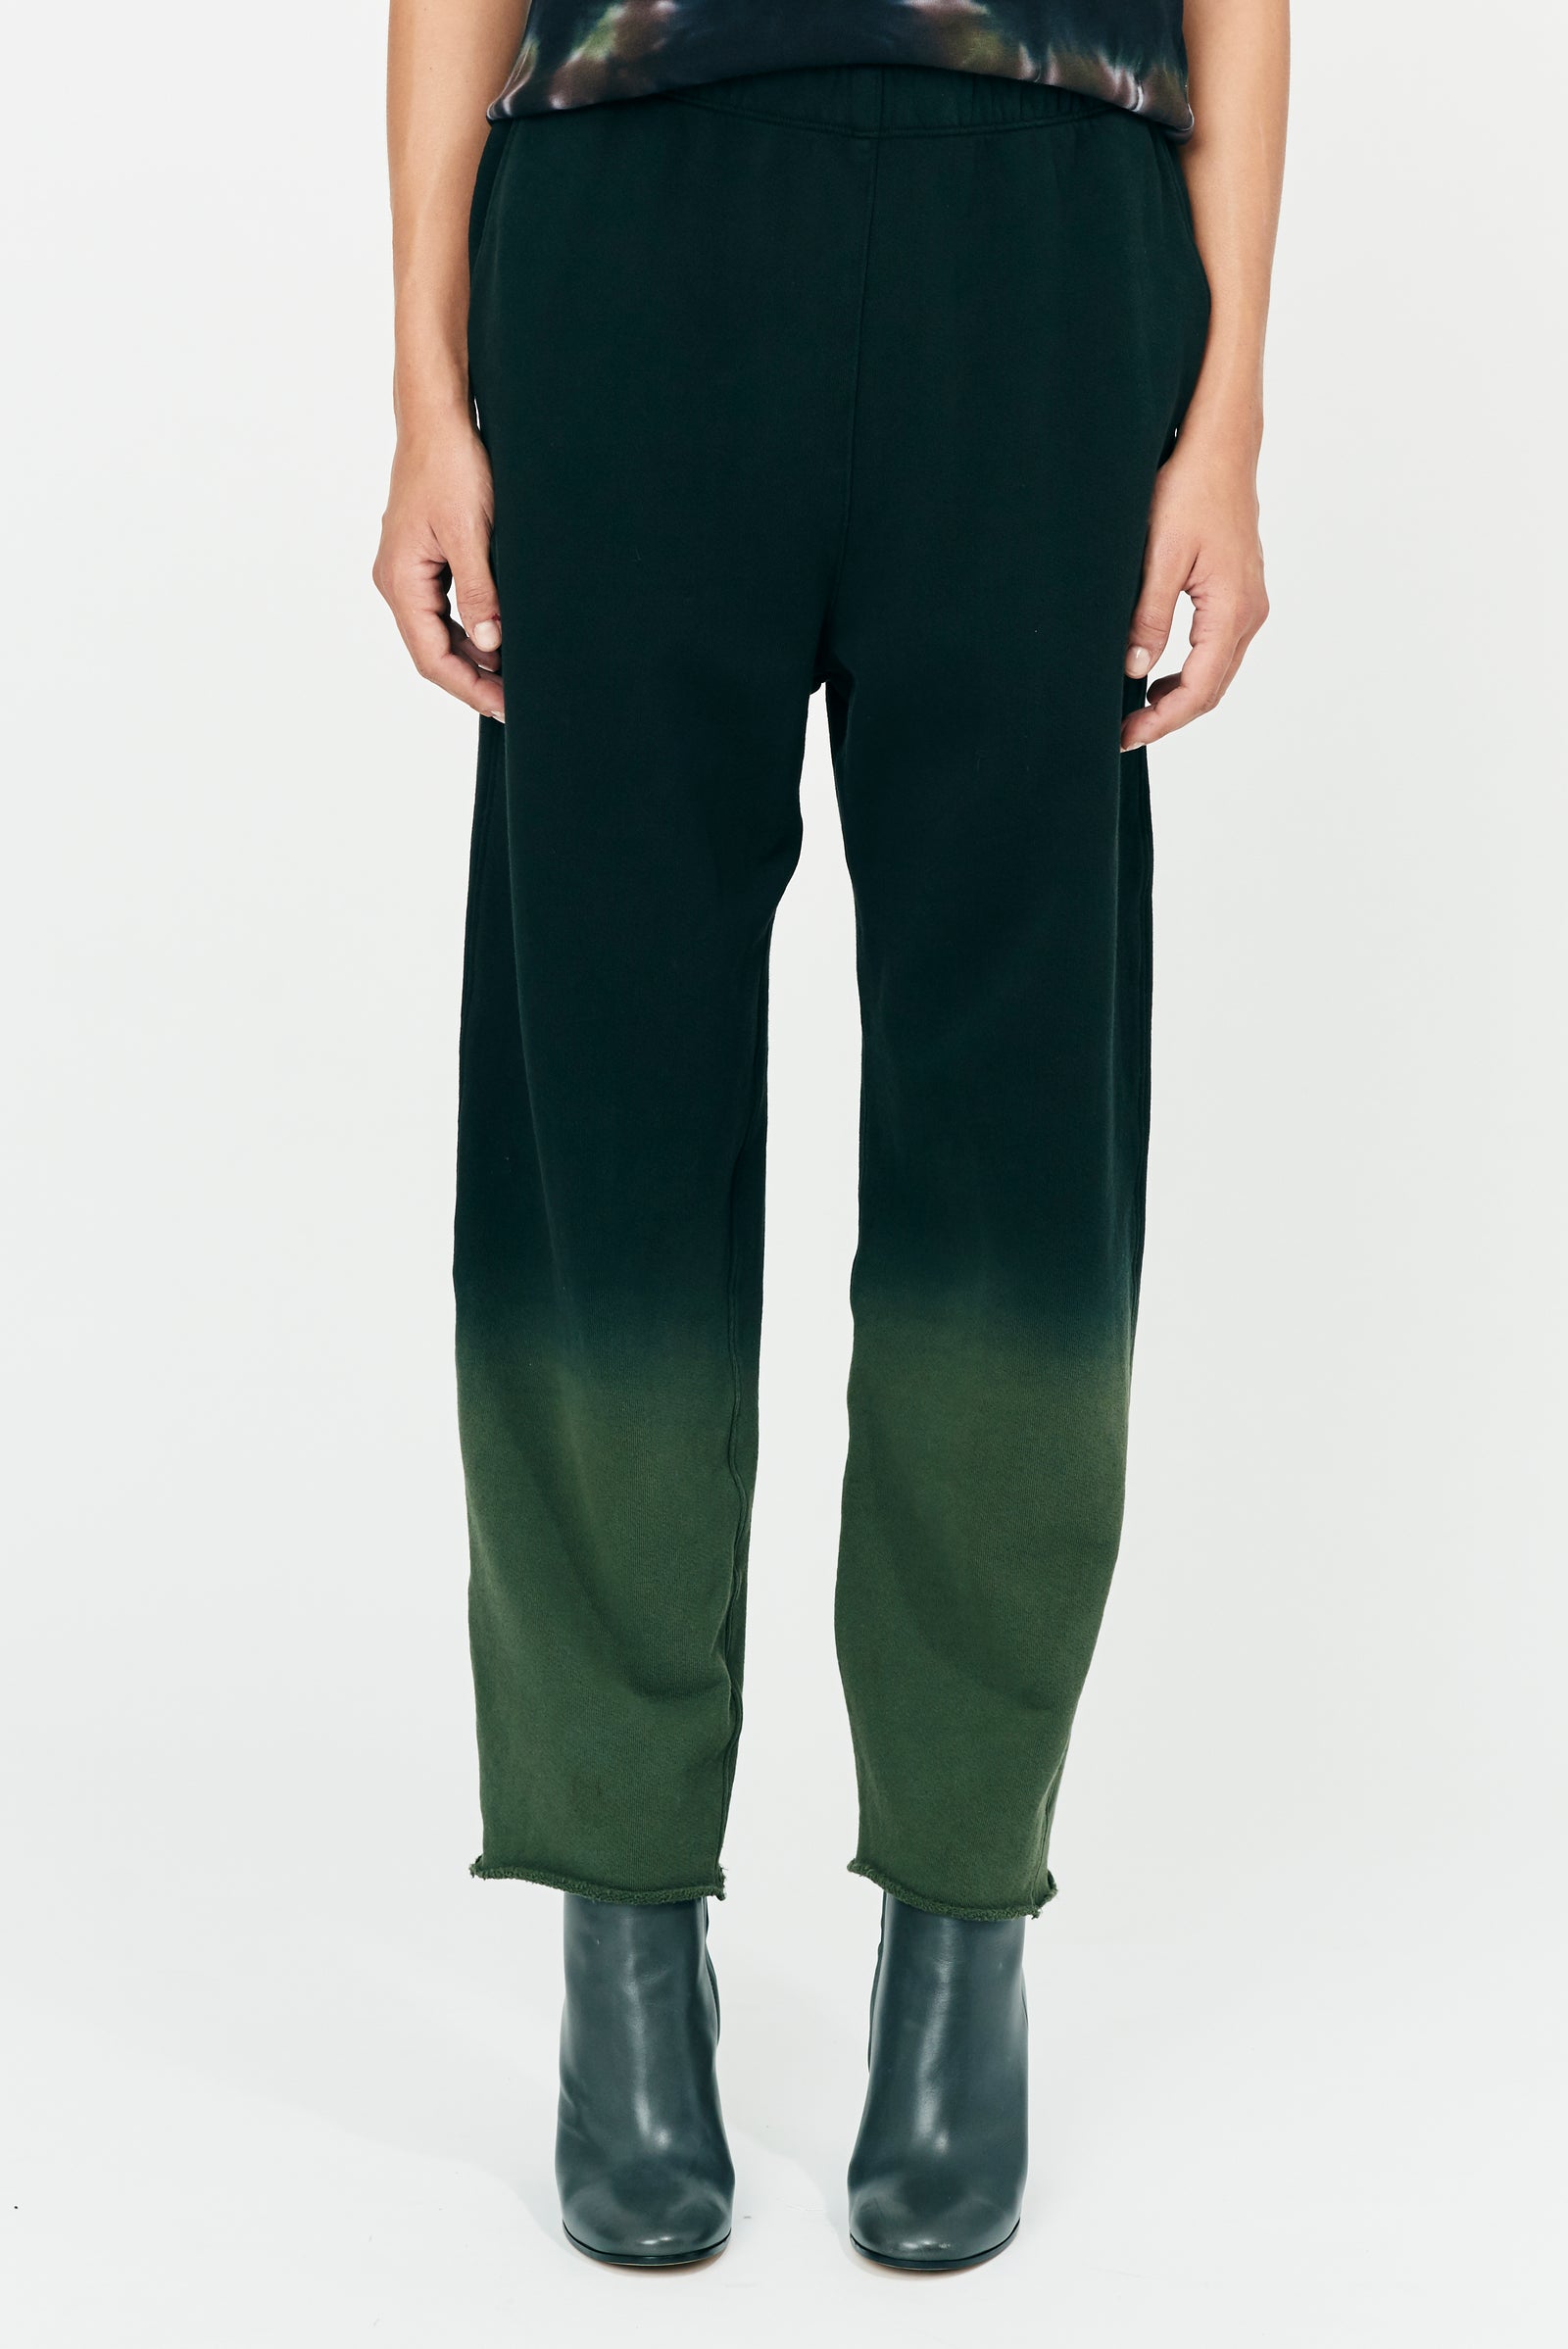 Forest Gradient Reflective Pond and Jersey Ankle Pant Front Close-Up View